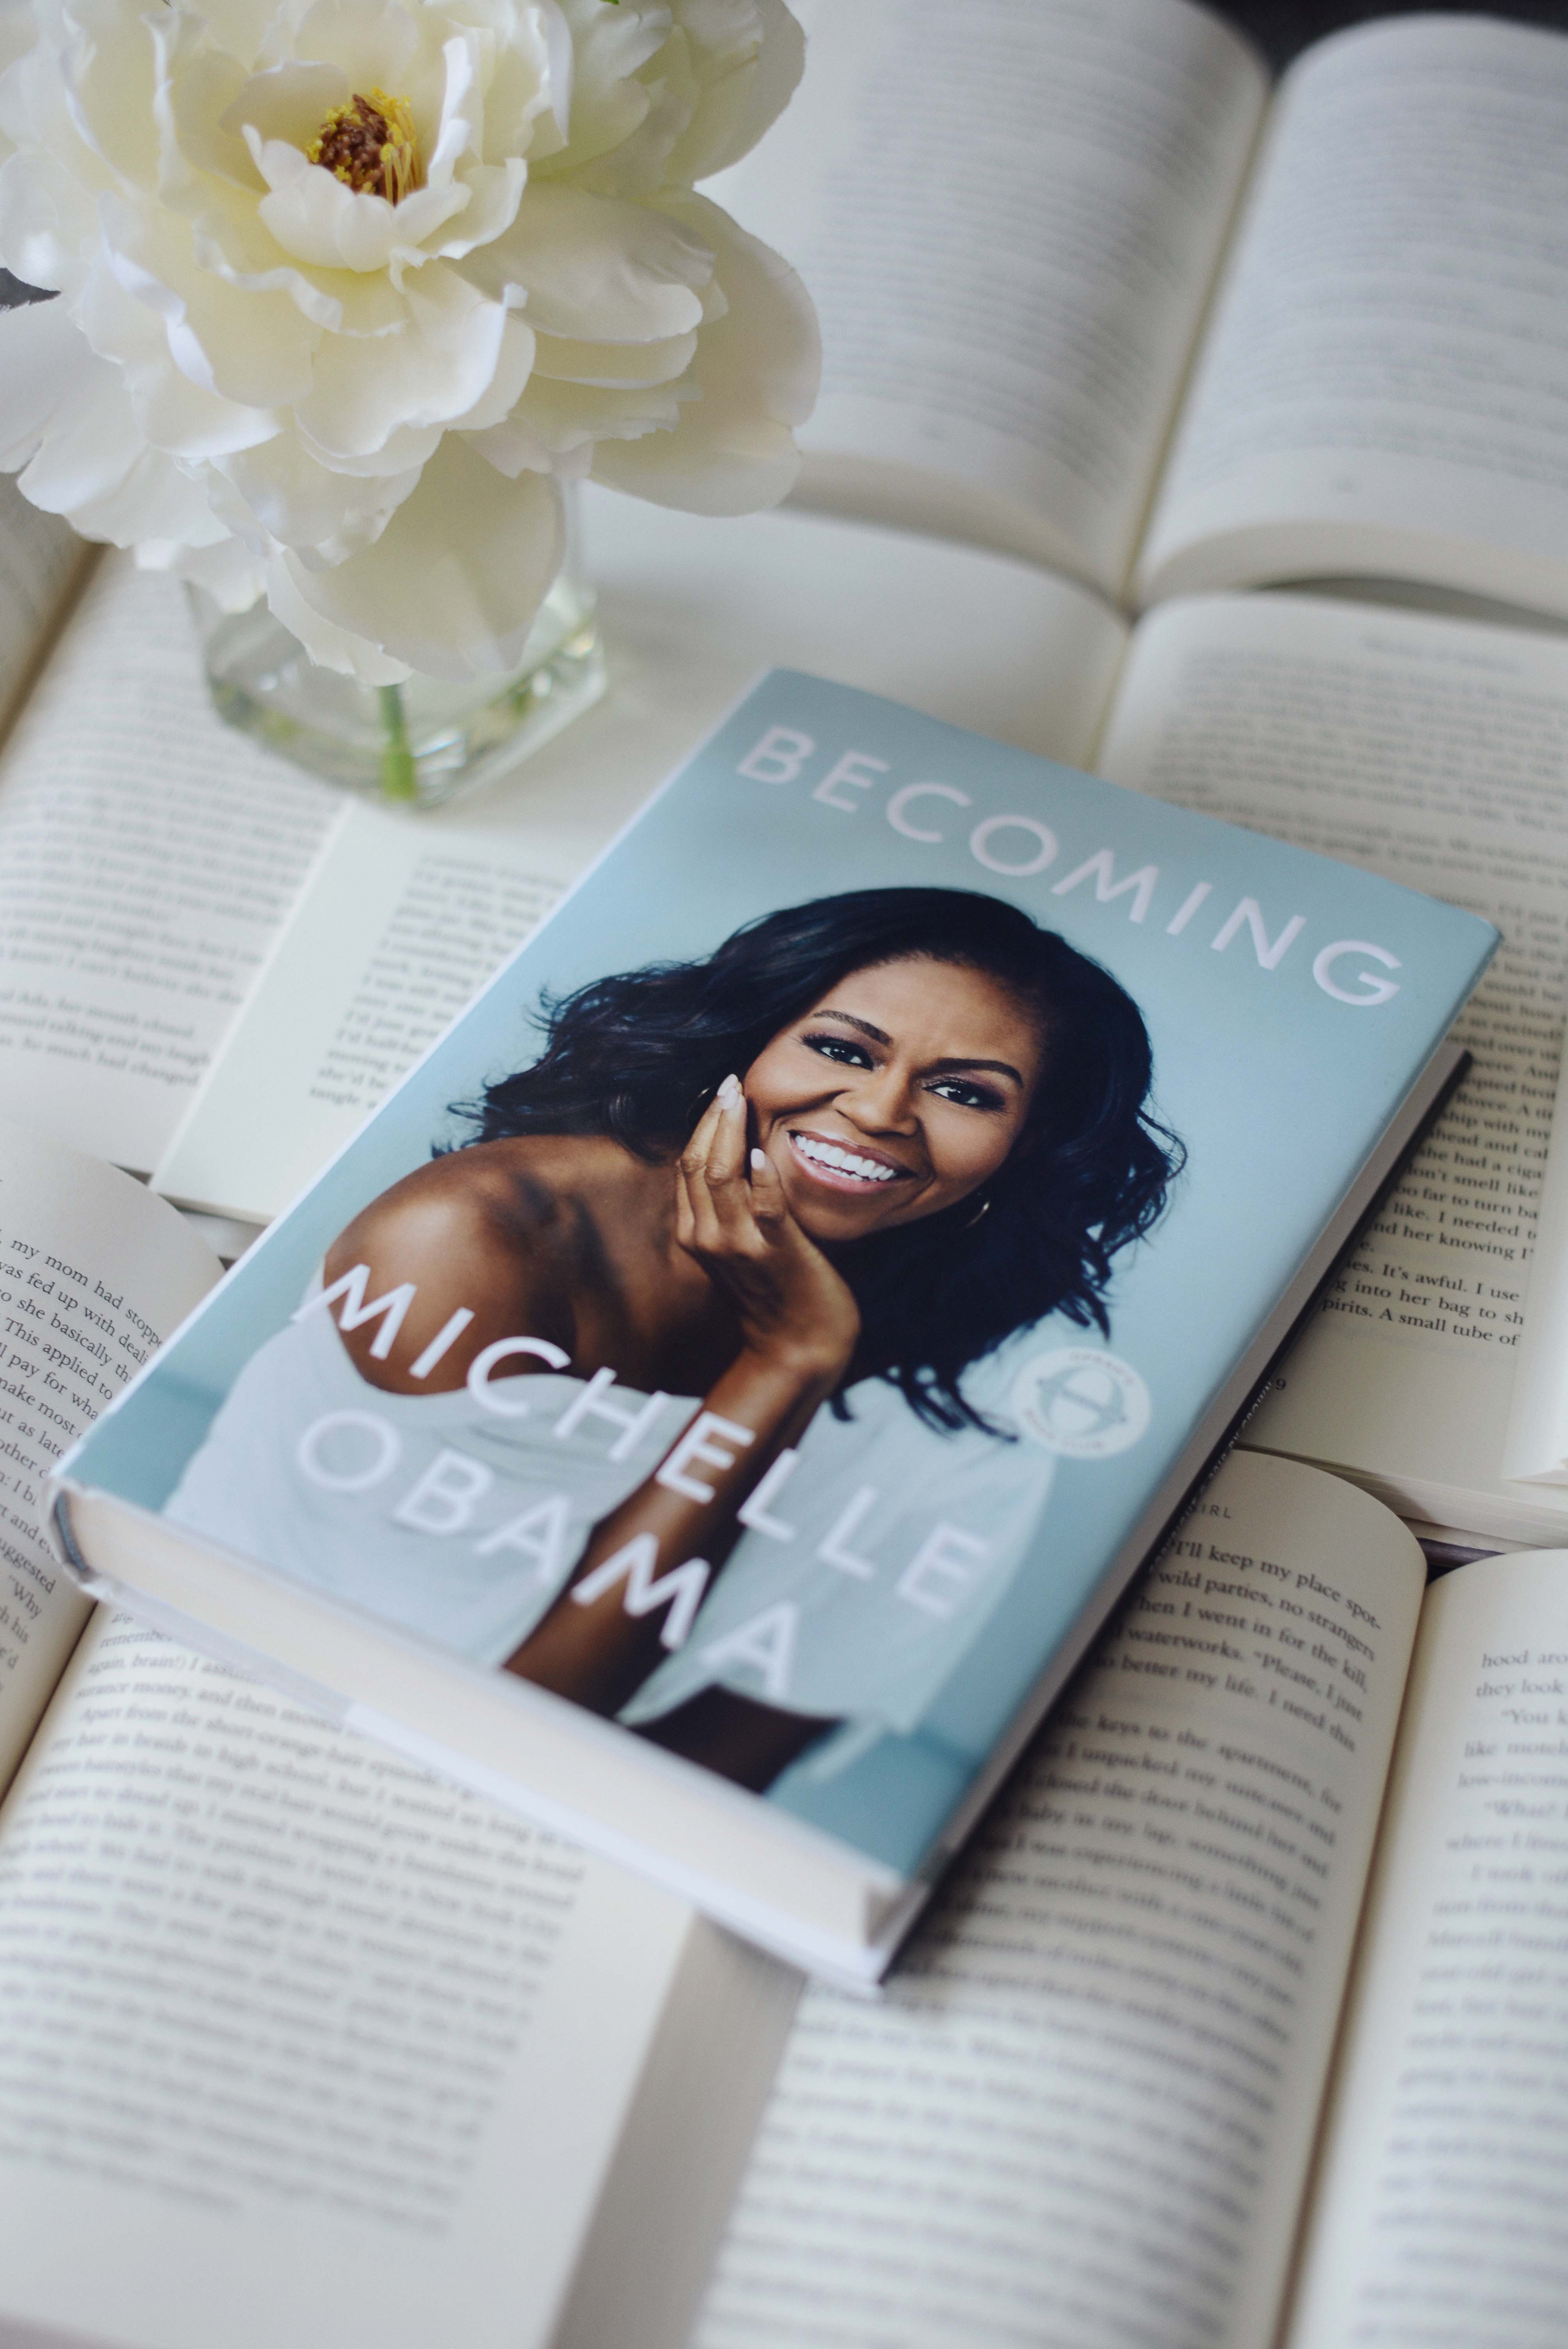 In Becoming Michelle Obama Mostly Opts For Empowerment